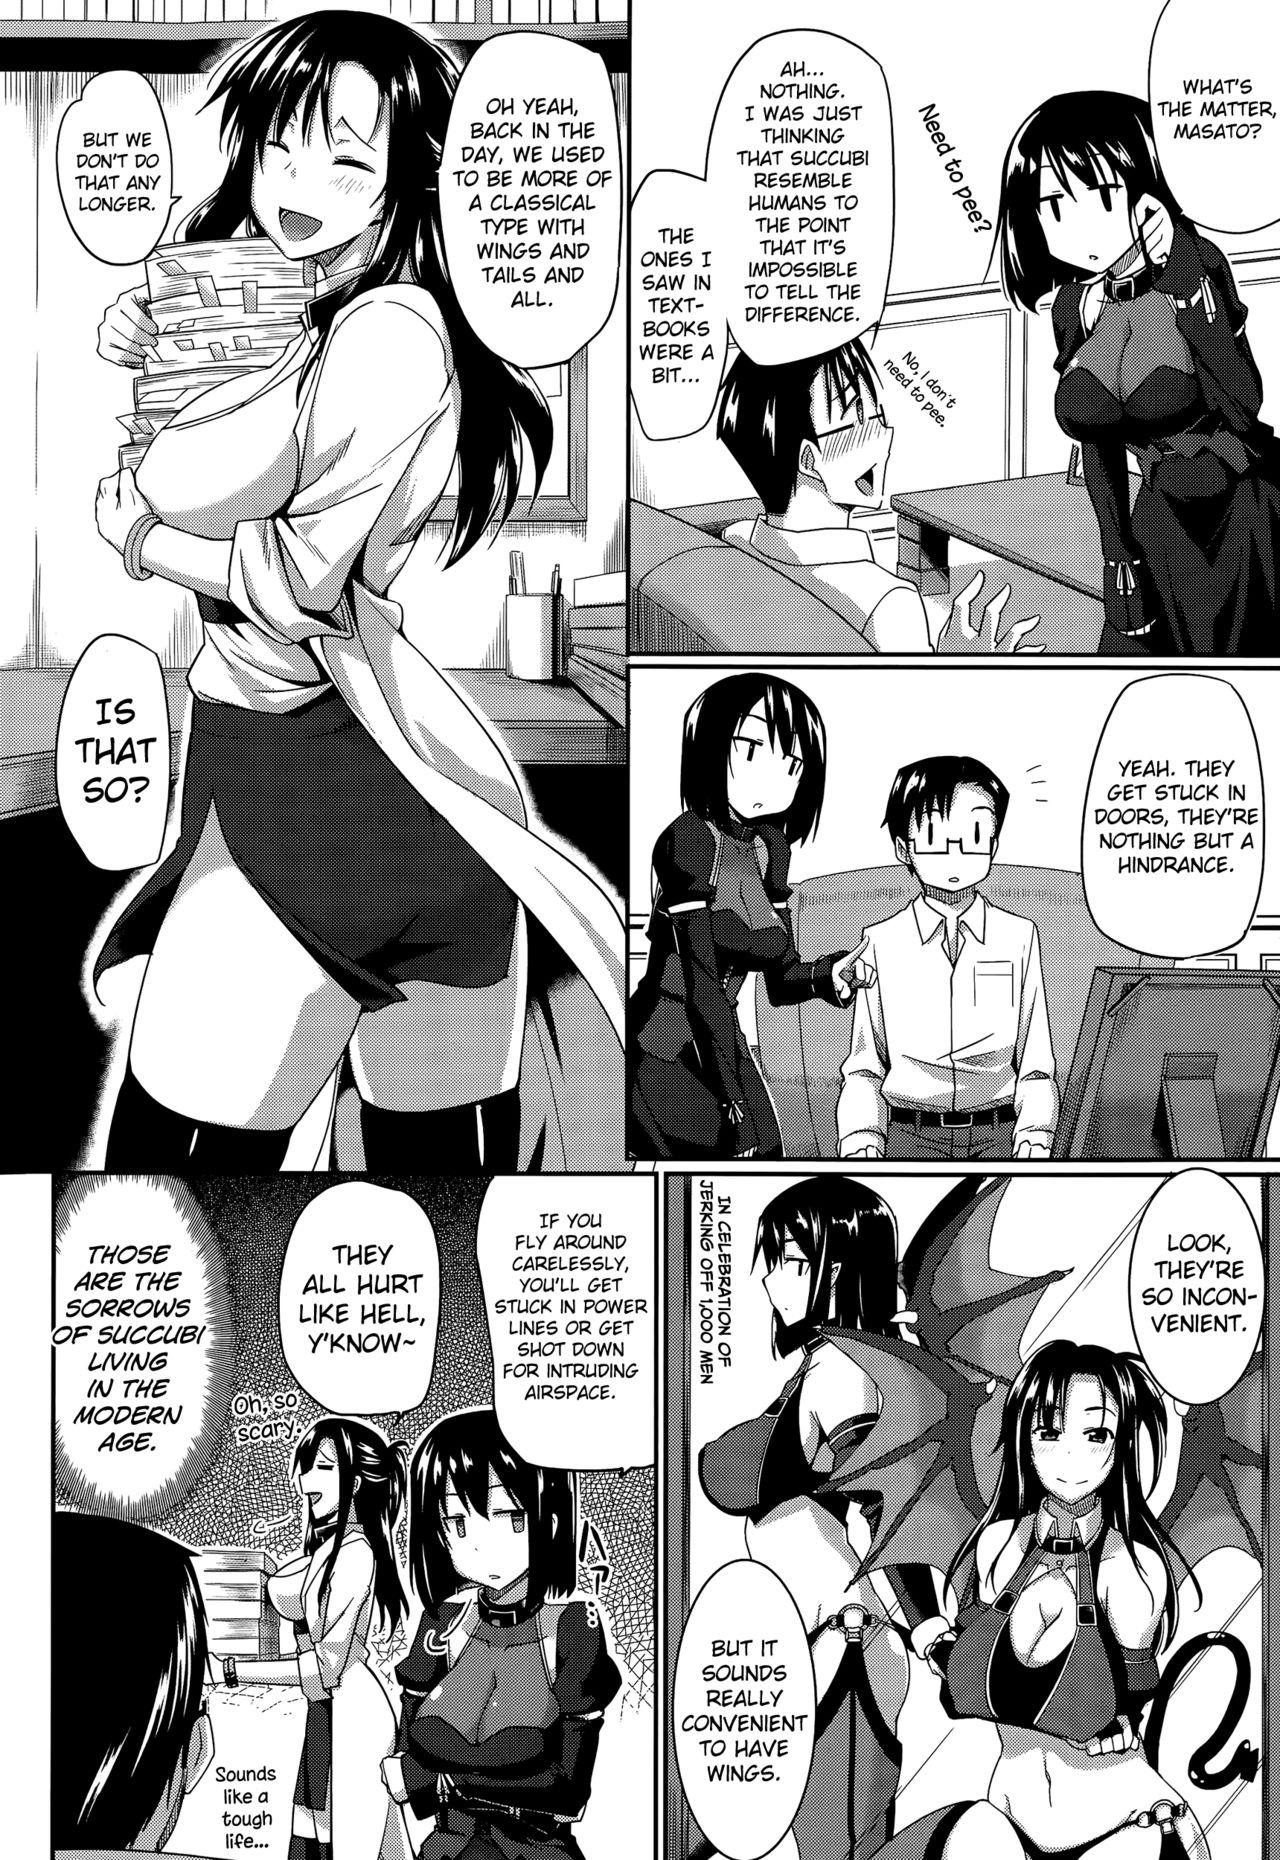 Ink Inma no Mikata! | Succubi's Supporter! Ch. 1-4 Chinese - Page 4